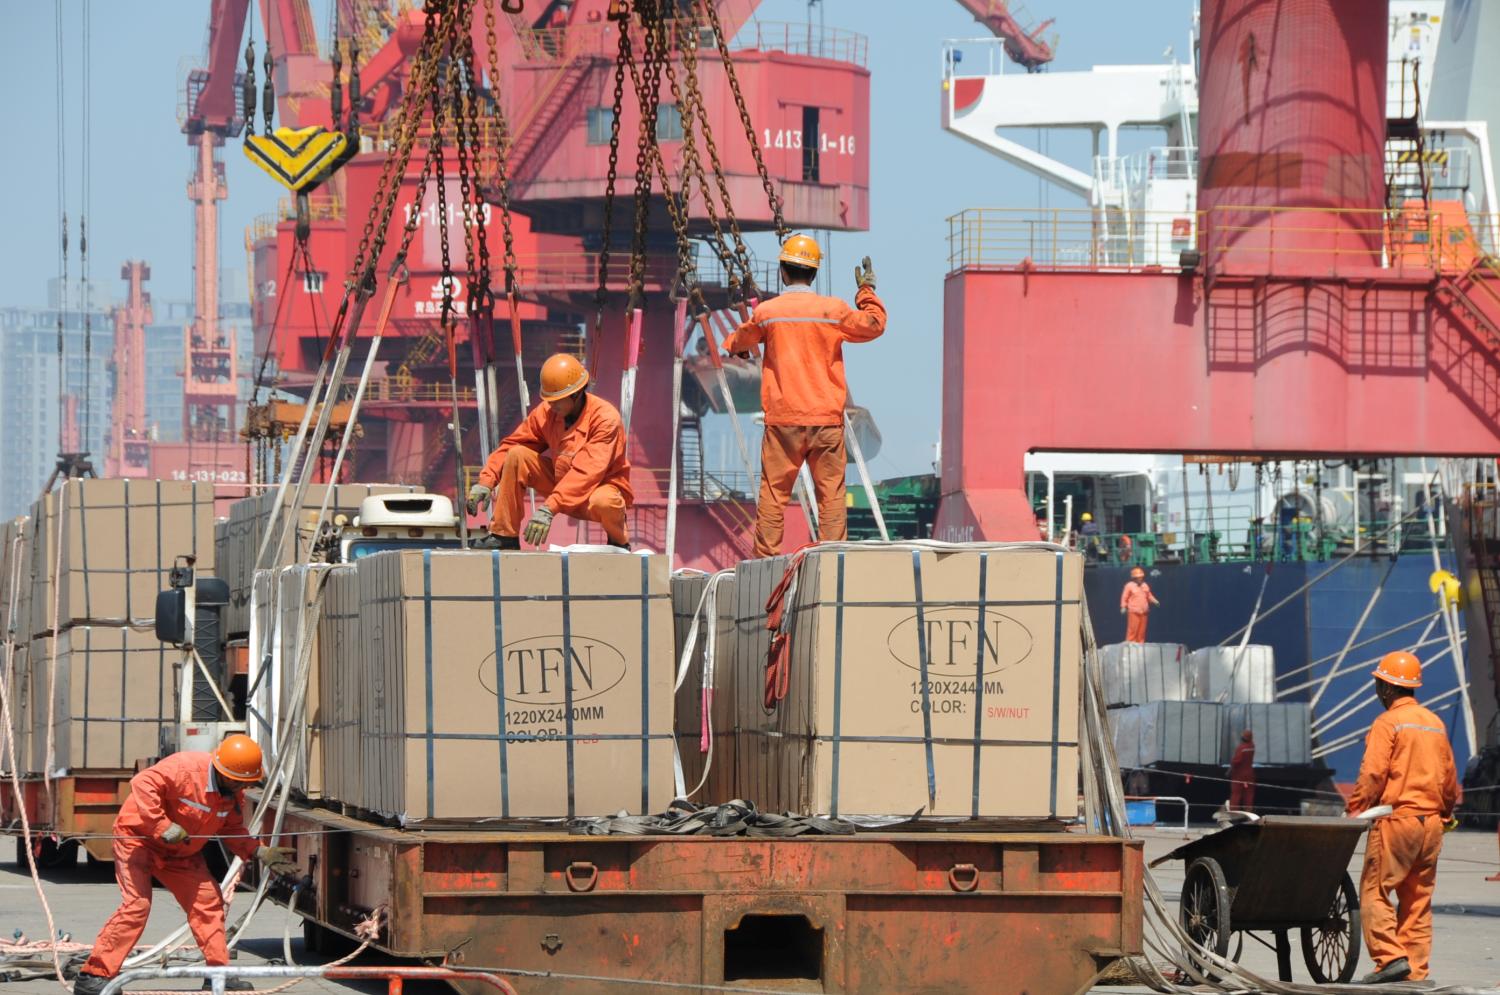 Workers load goods for export onto a crane at a port in Lianyungang, Jiangsu province, China June 7, 2019. Picture taken June 7, 2019. REUTERS/Stringer ATTENTION EDITORS - THIS IMAGE WAS PROVIDED BY A THIRD PARTY. CHINA OUT. - RC18EA753F70